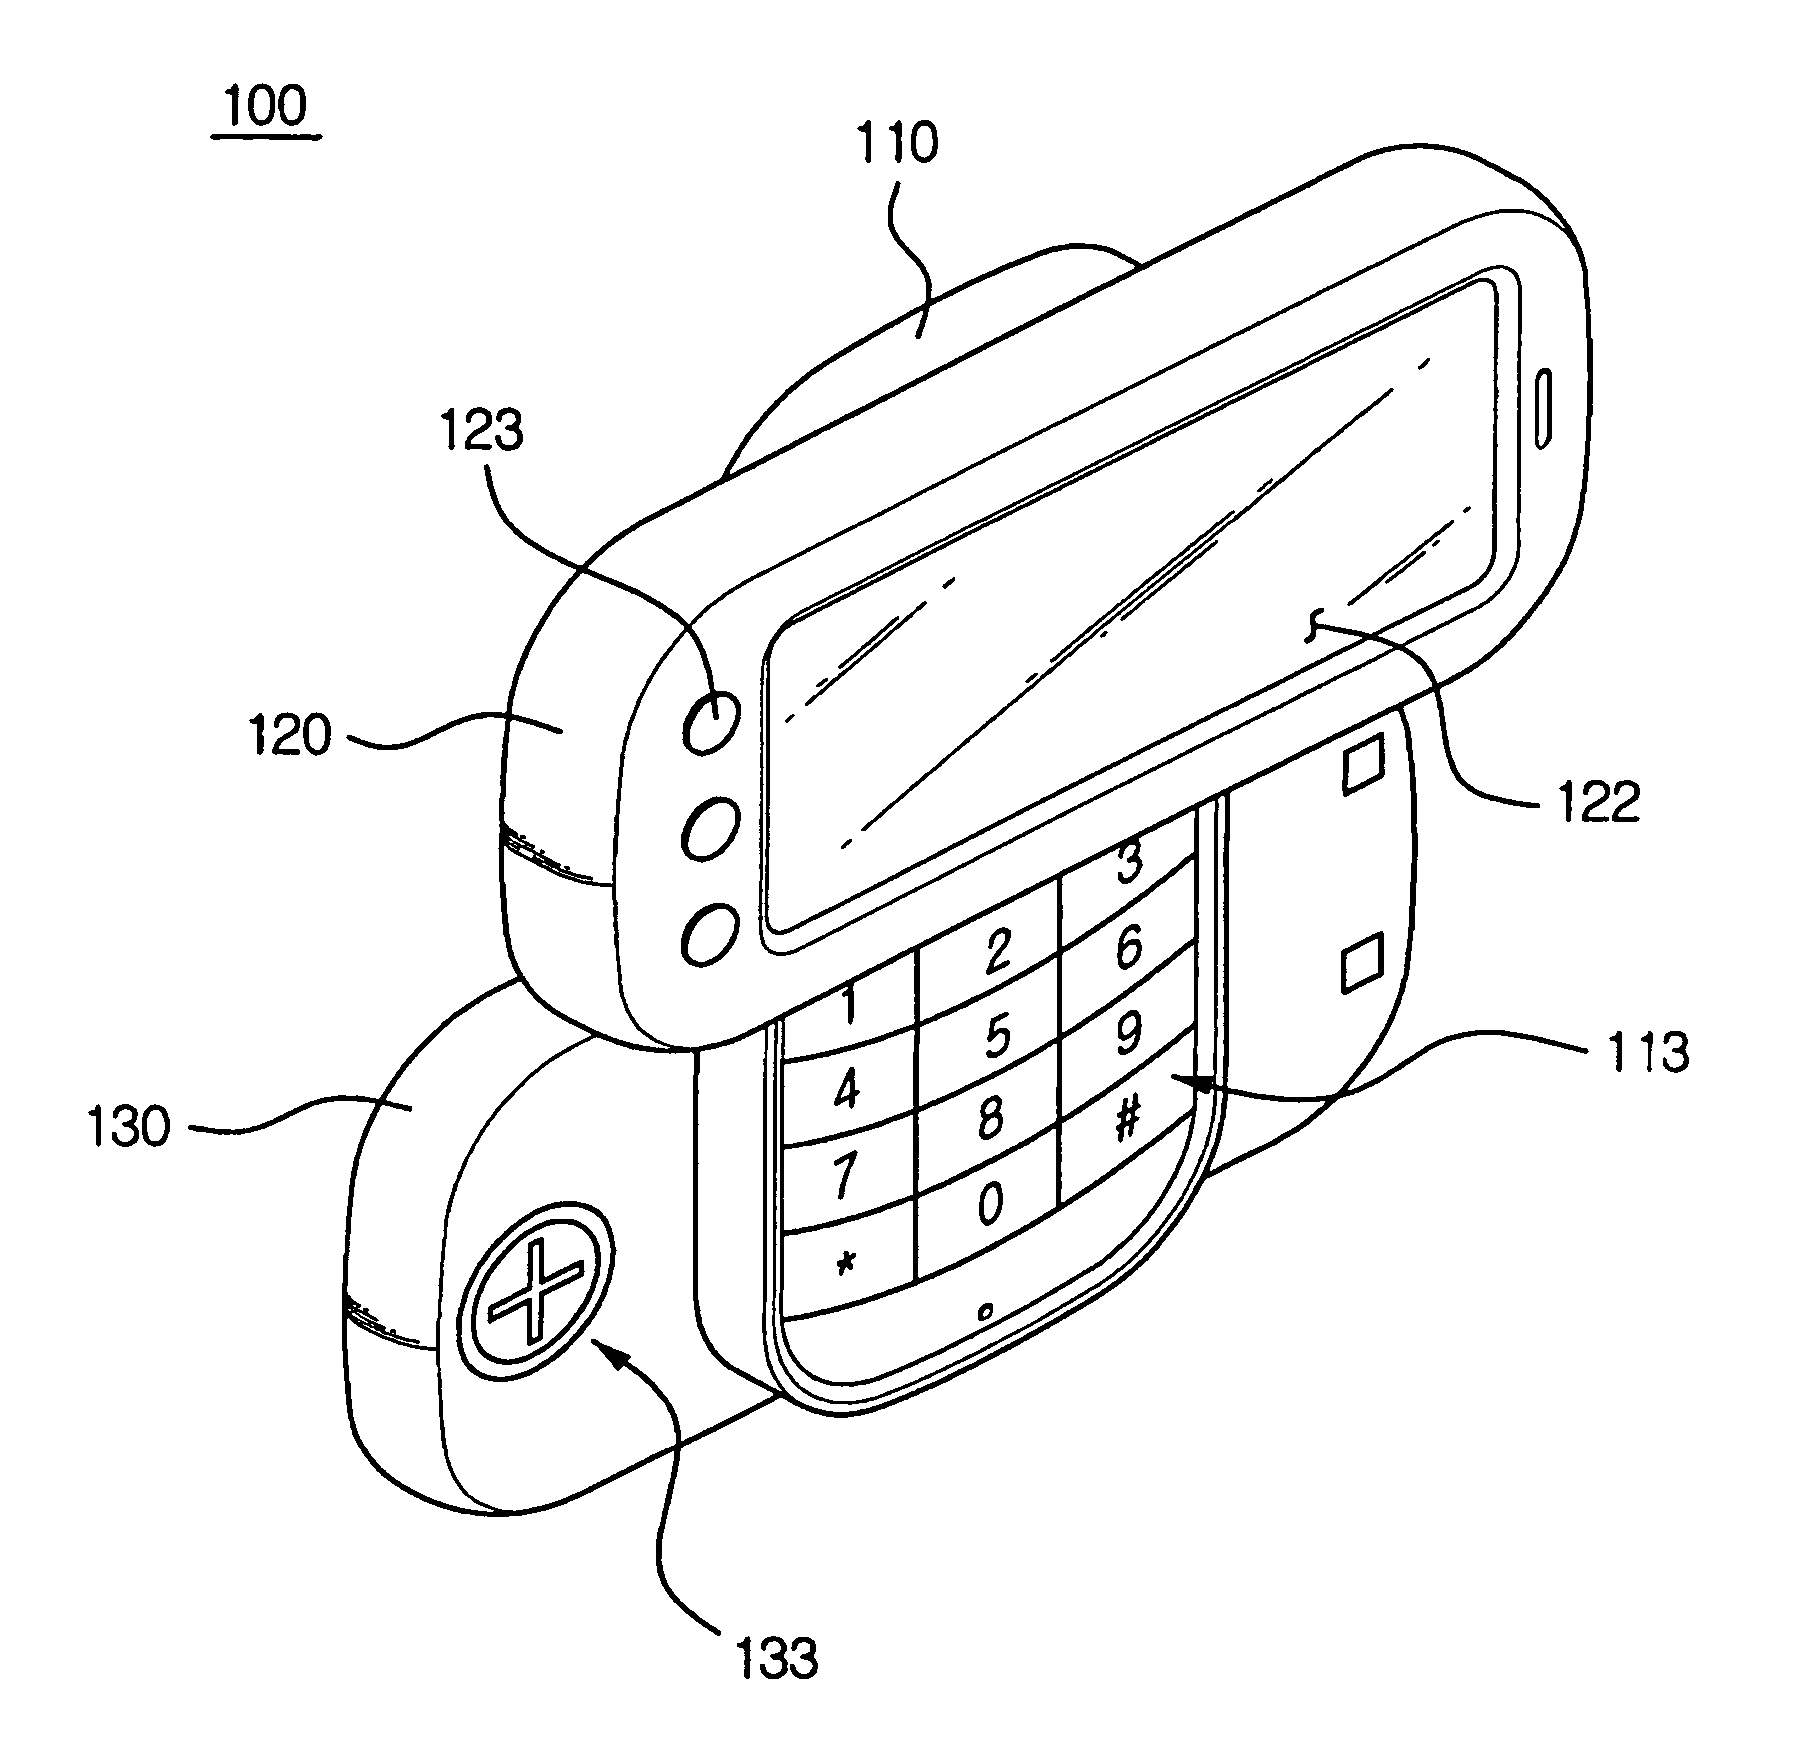 Portable device including display unit and keypad unit